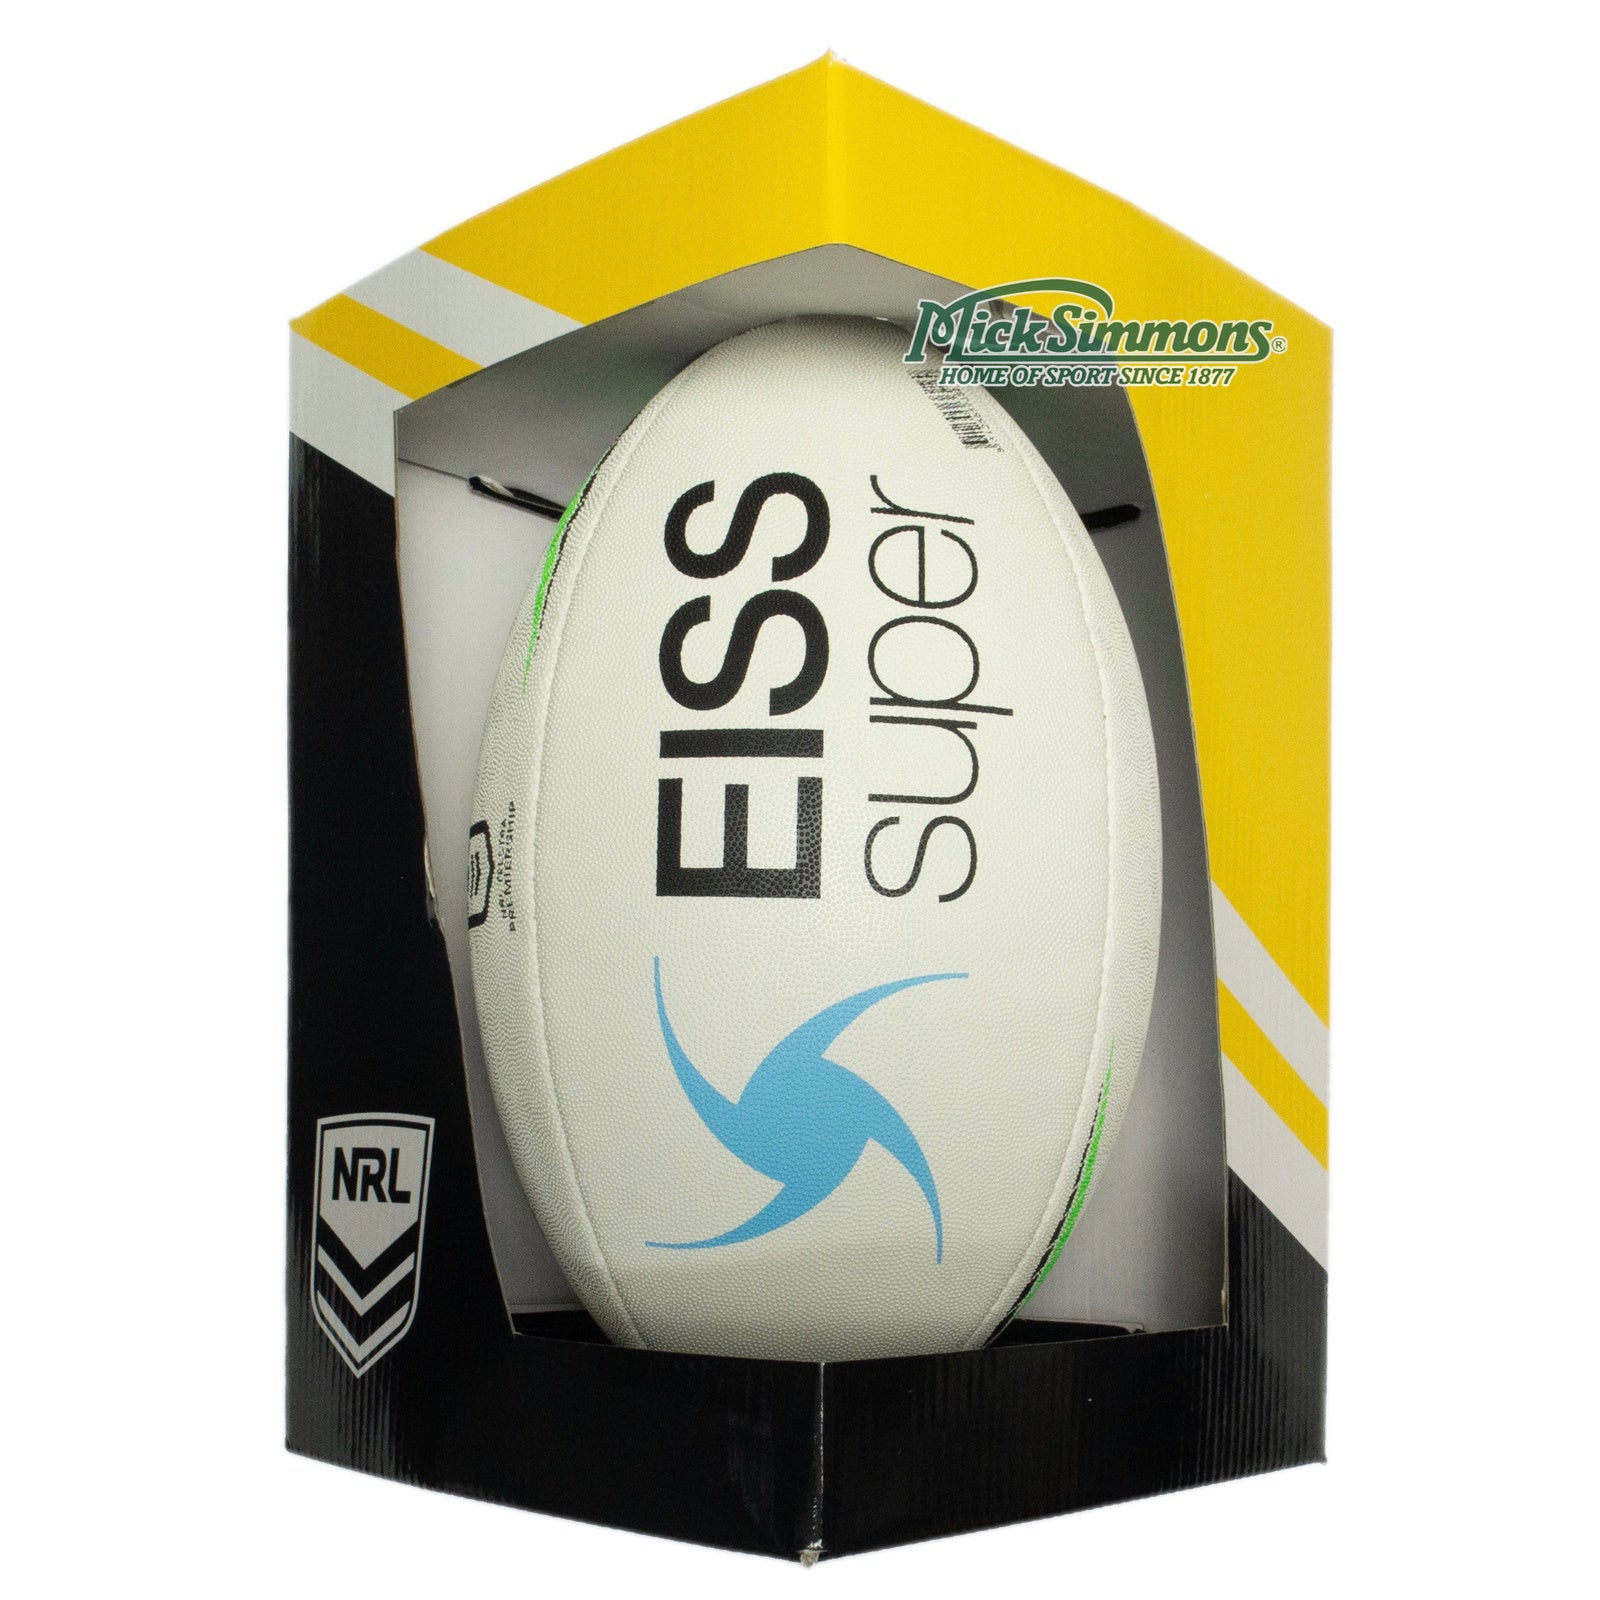 Steeden 2022 NRL Rugby League Premiership Boxed Match Ball Size 5 (Full Size) Mick Simmons Sport